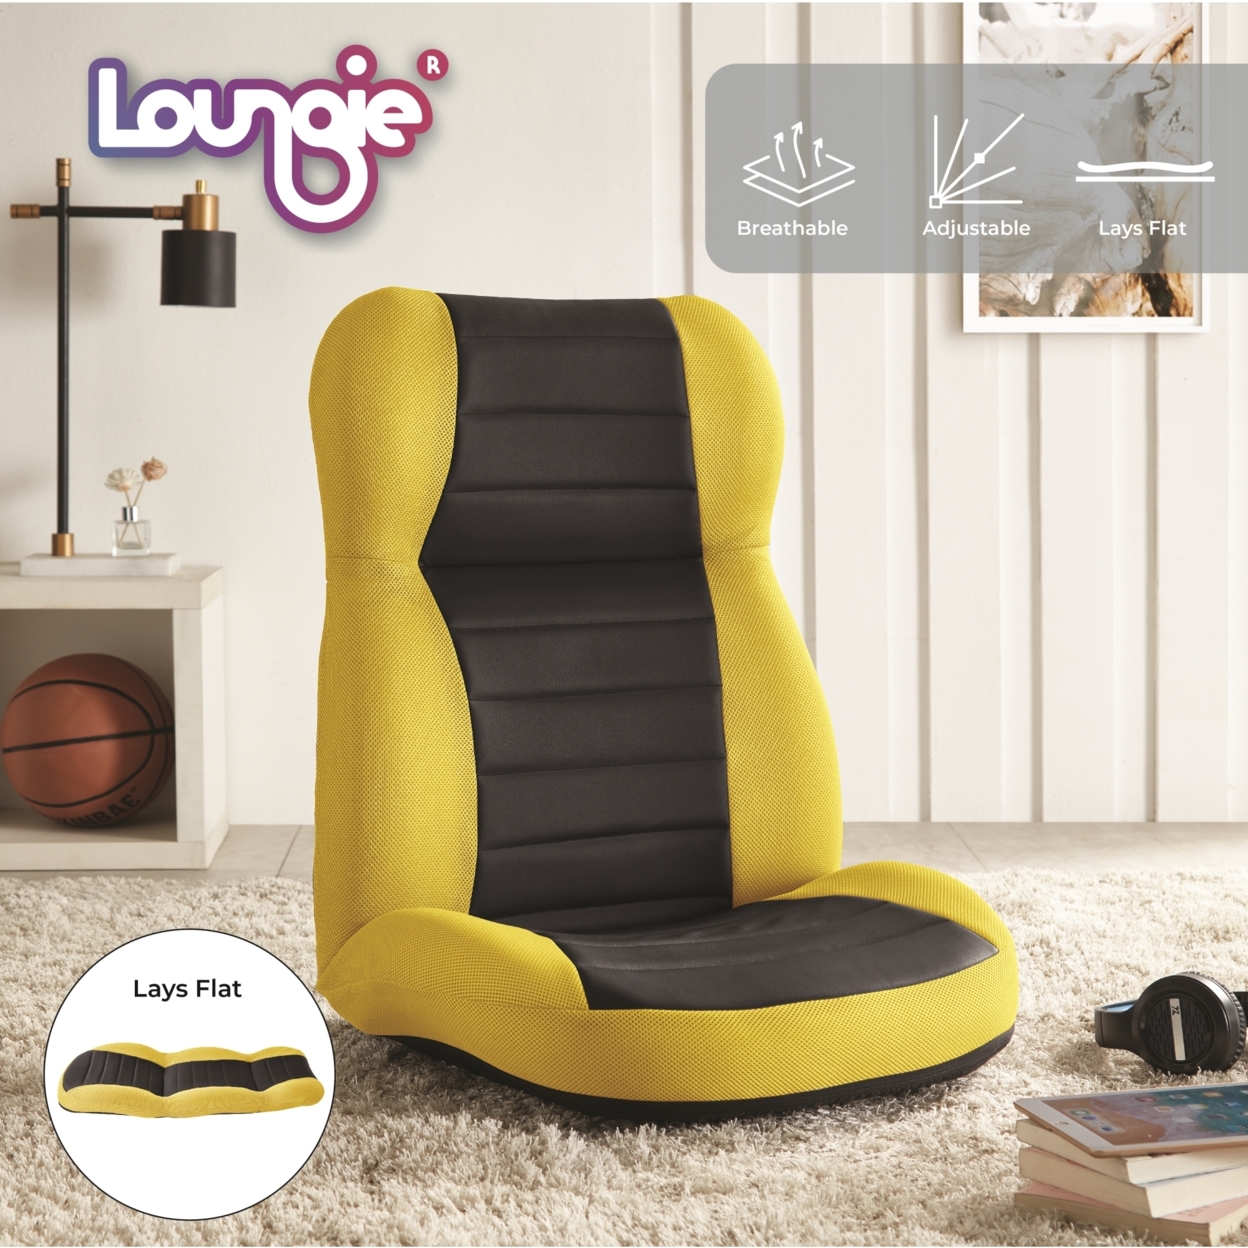 Snow Chair - 5 Adjustable Back Positions, 3 Headrest Positions, Reclines To Flat, Washable Cover, Steel Rod Construction - Yellow